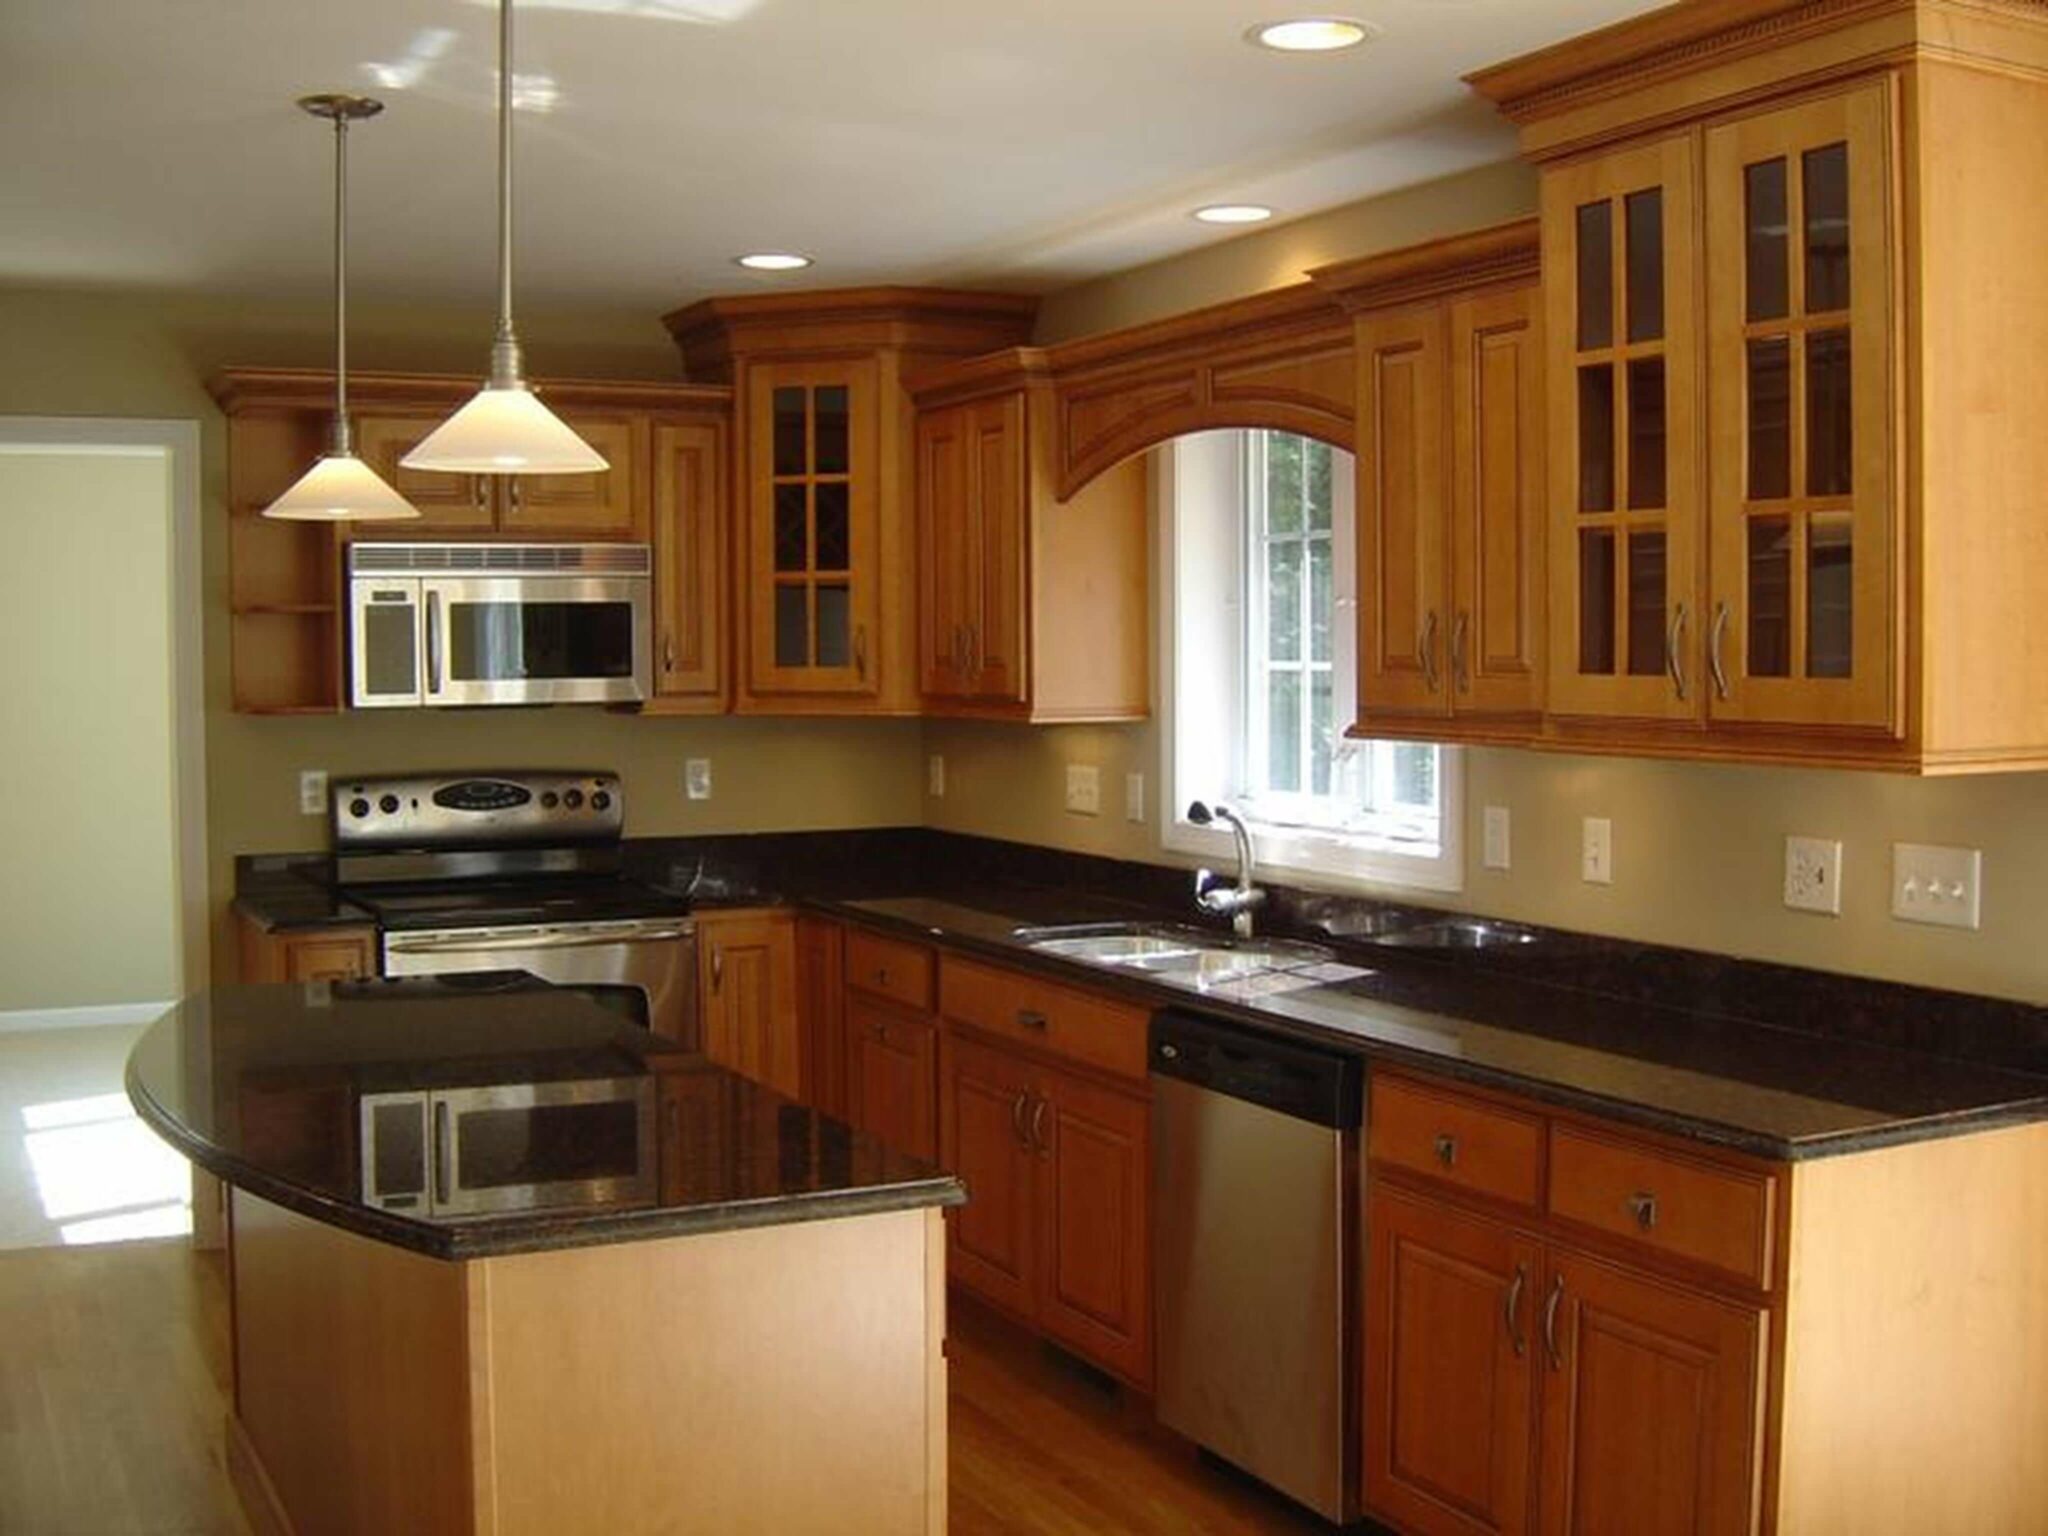 Let Kitchen Design Concepts Help You Create A Kitchen That’s Right For ...